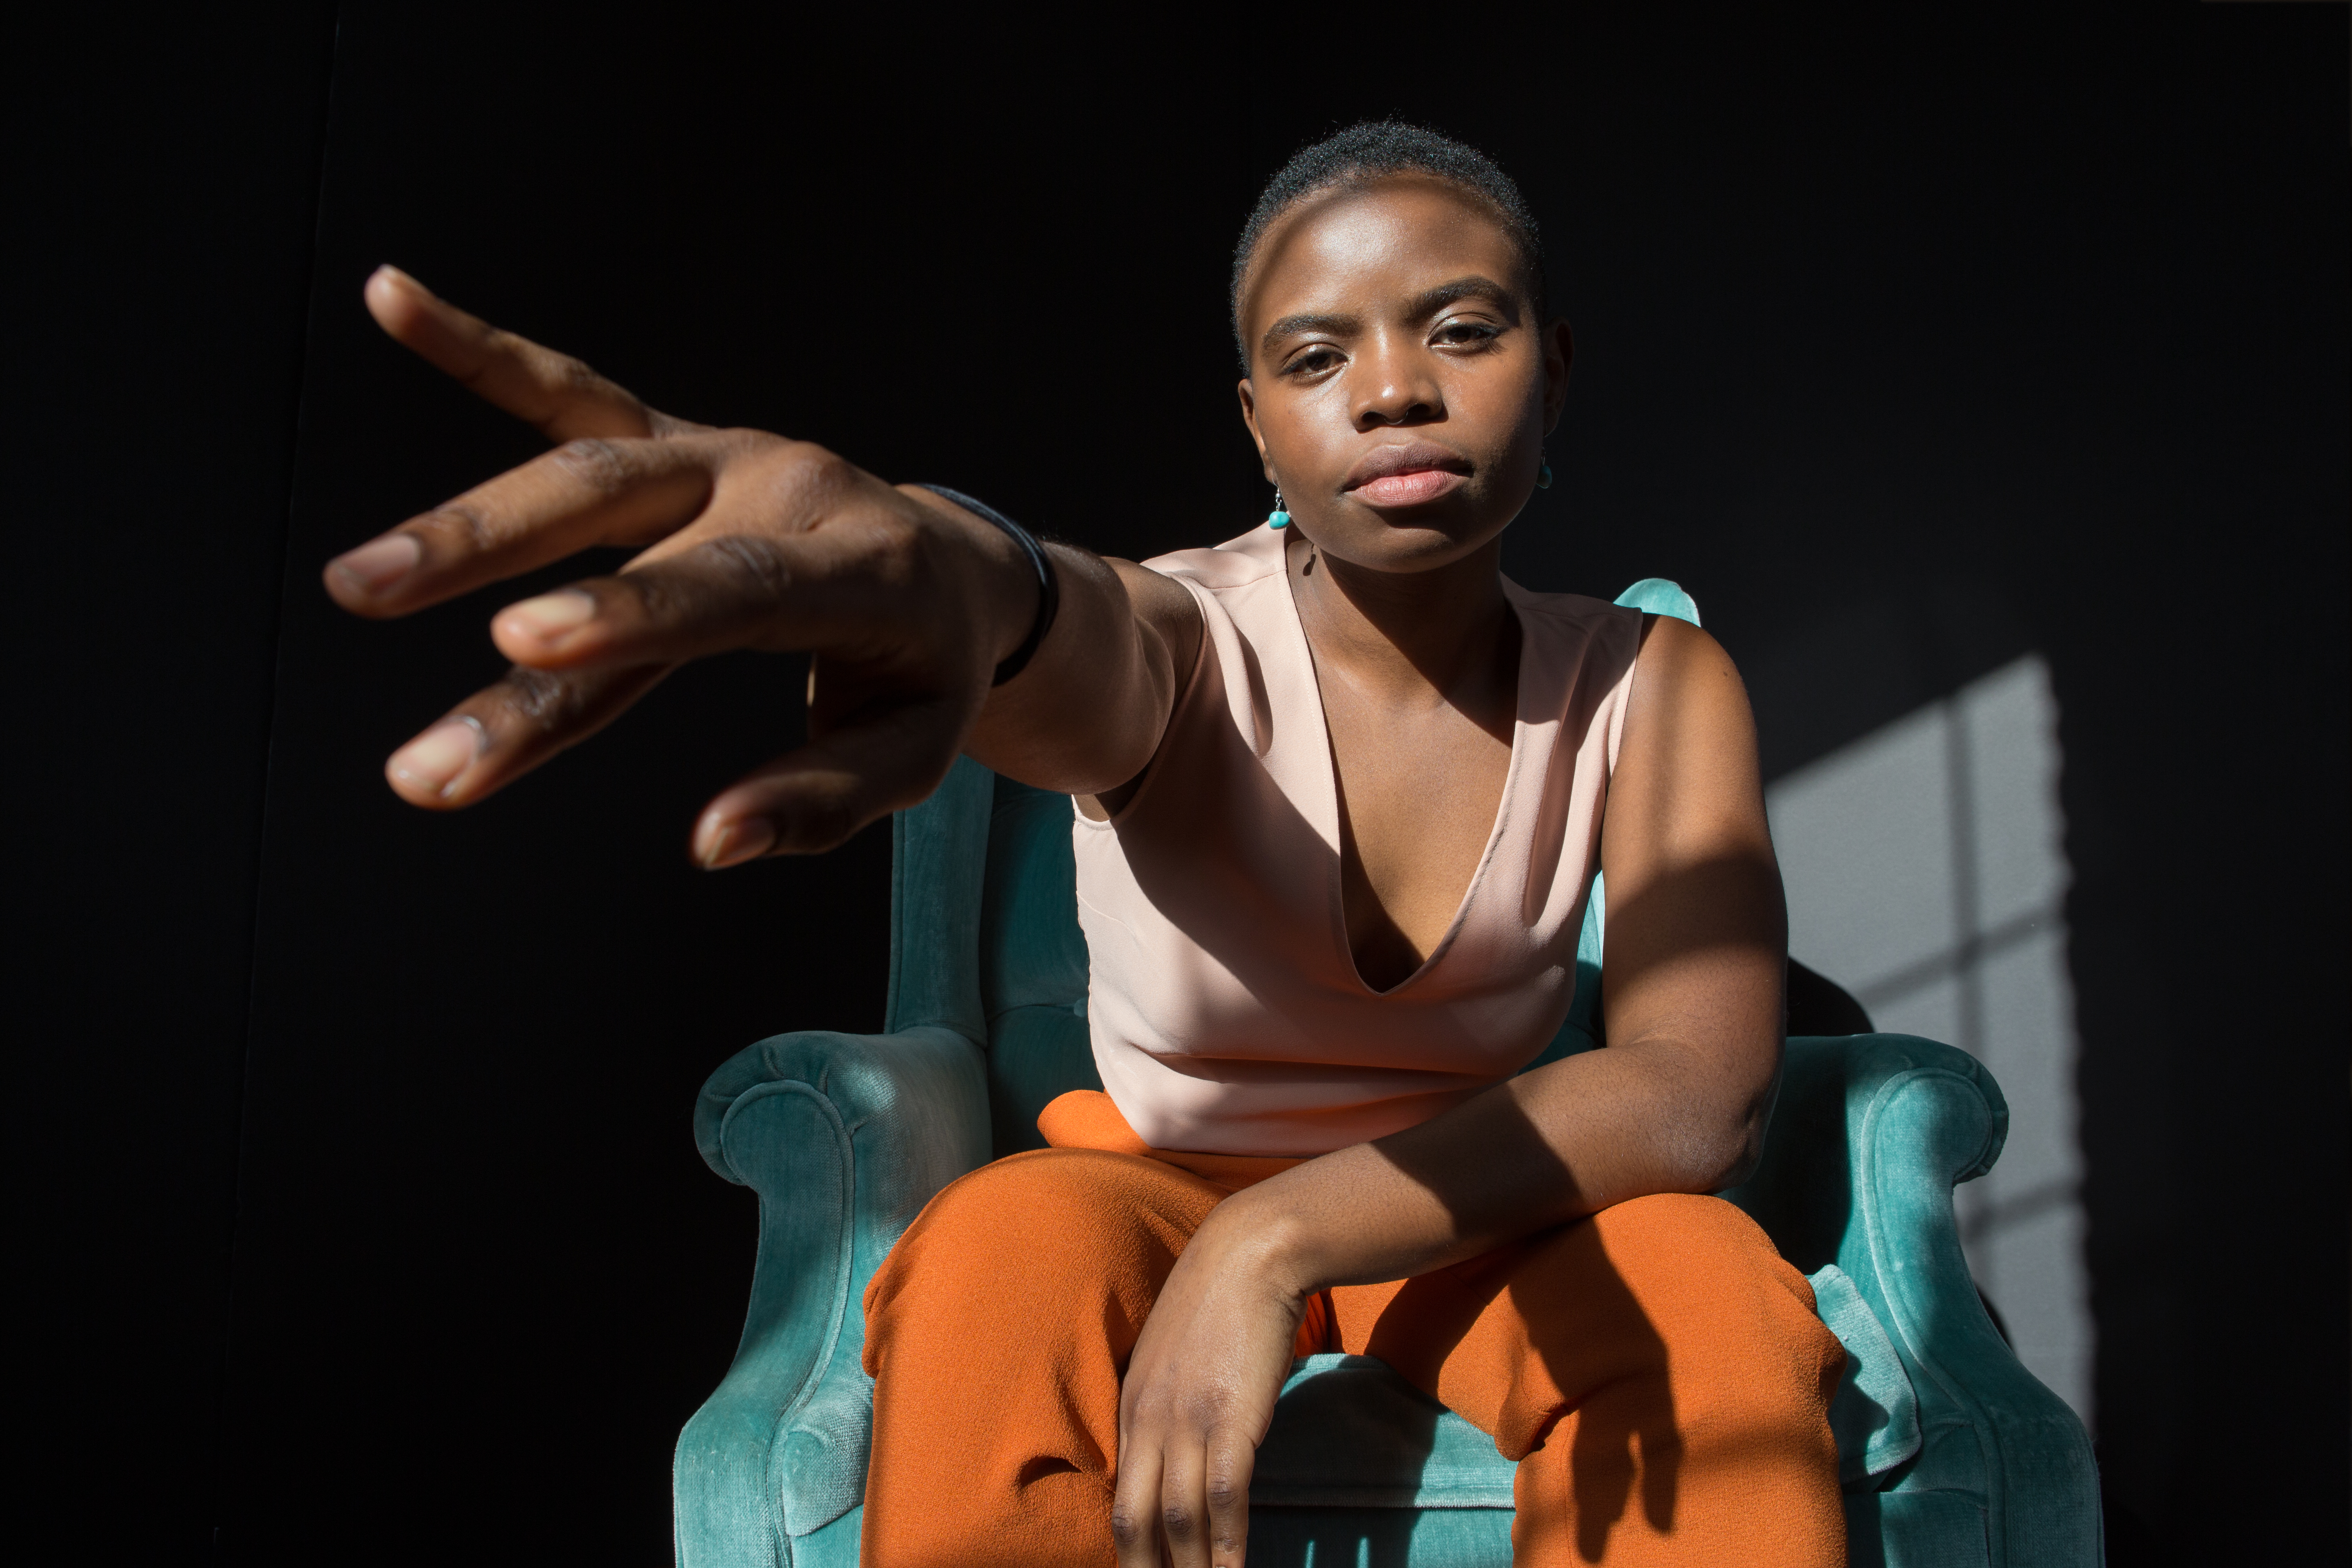 Introducing Vagabon: ‘This is who I am. My music is what I’m offering’